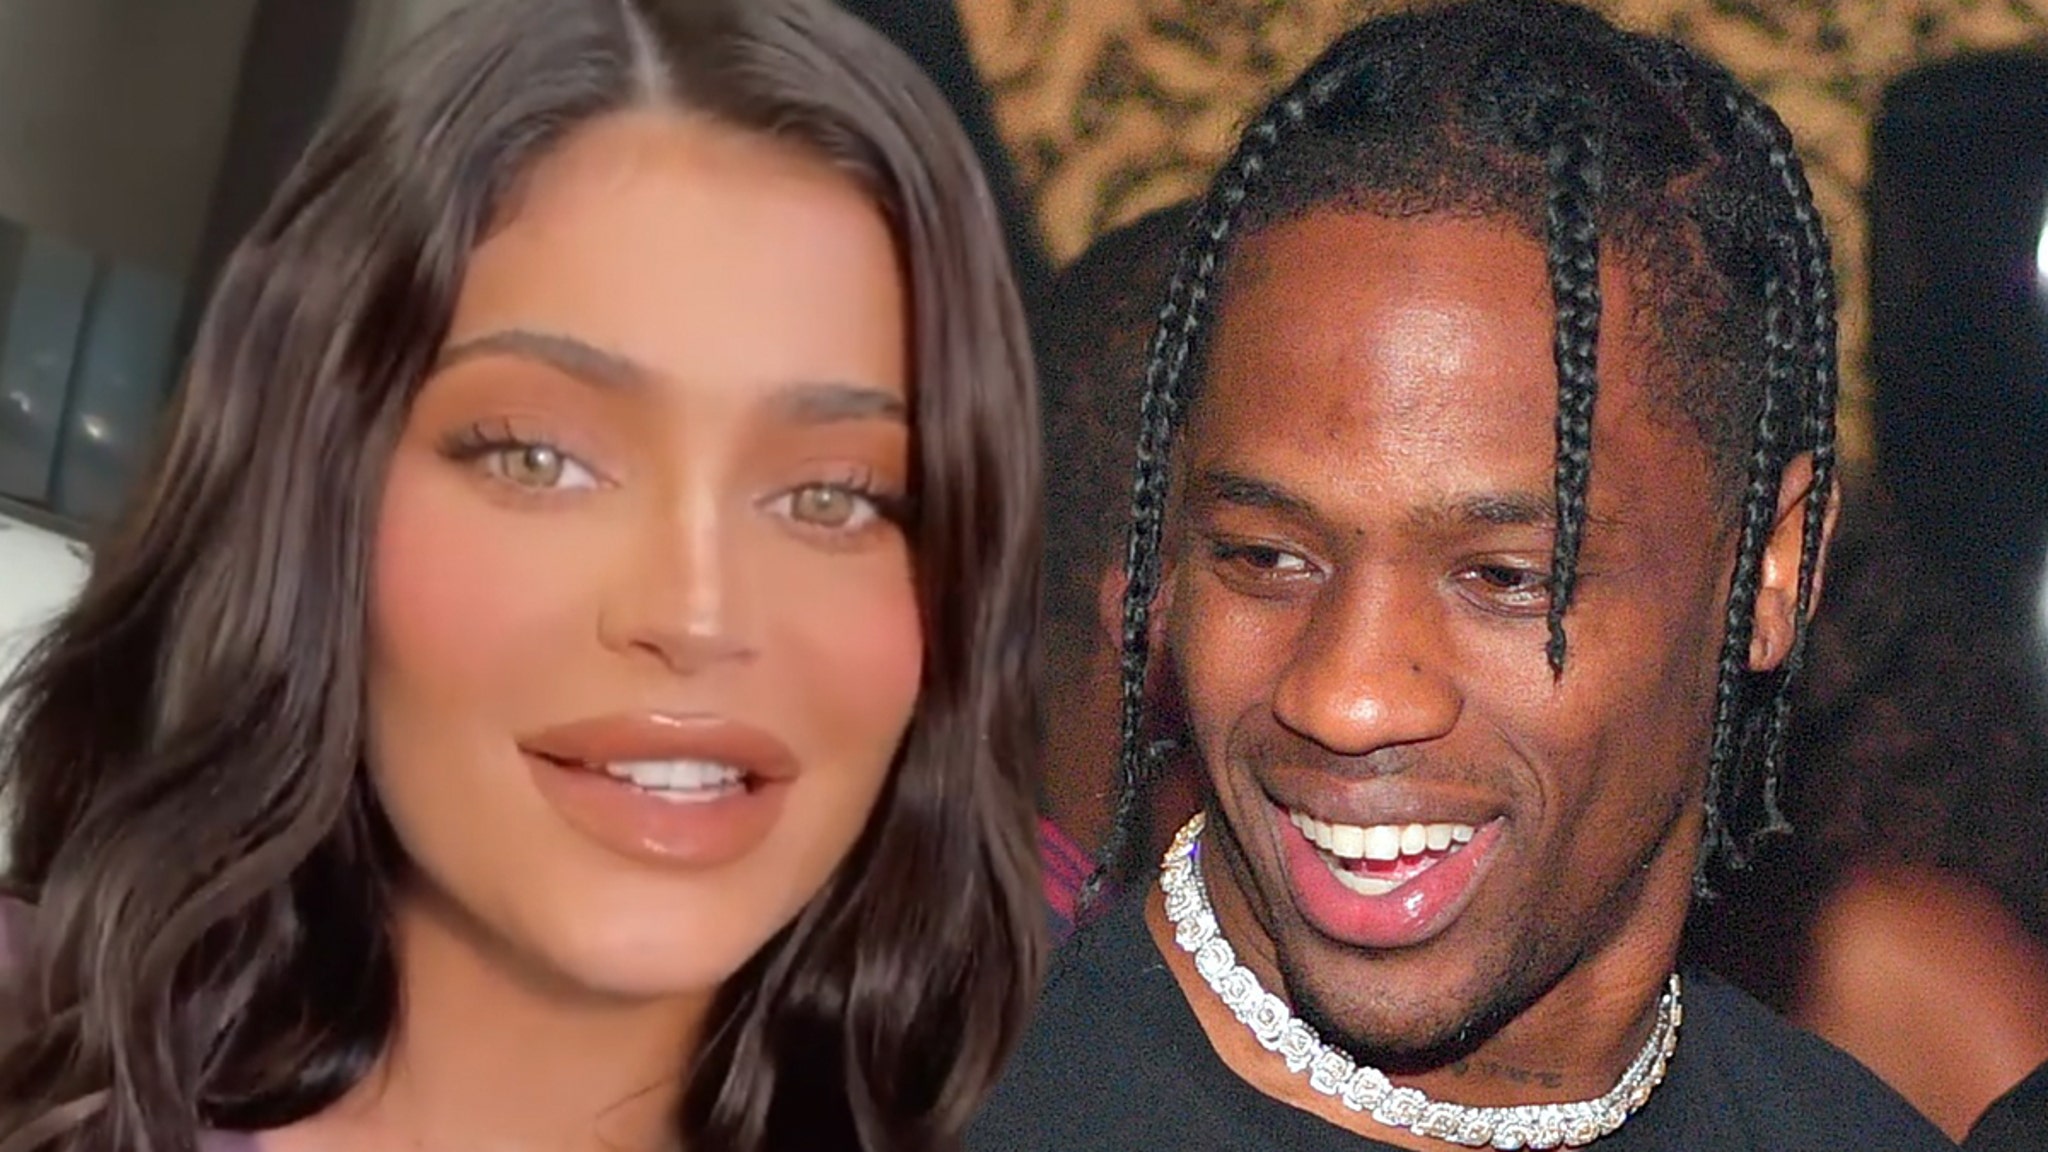 Kylie Jenner Pregnant, Expecting Baby Number 2 with Travis Scott